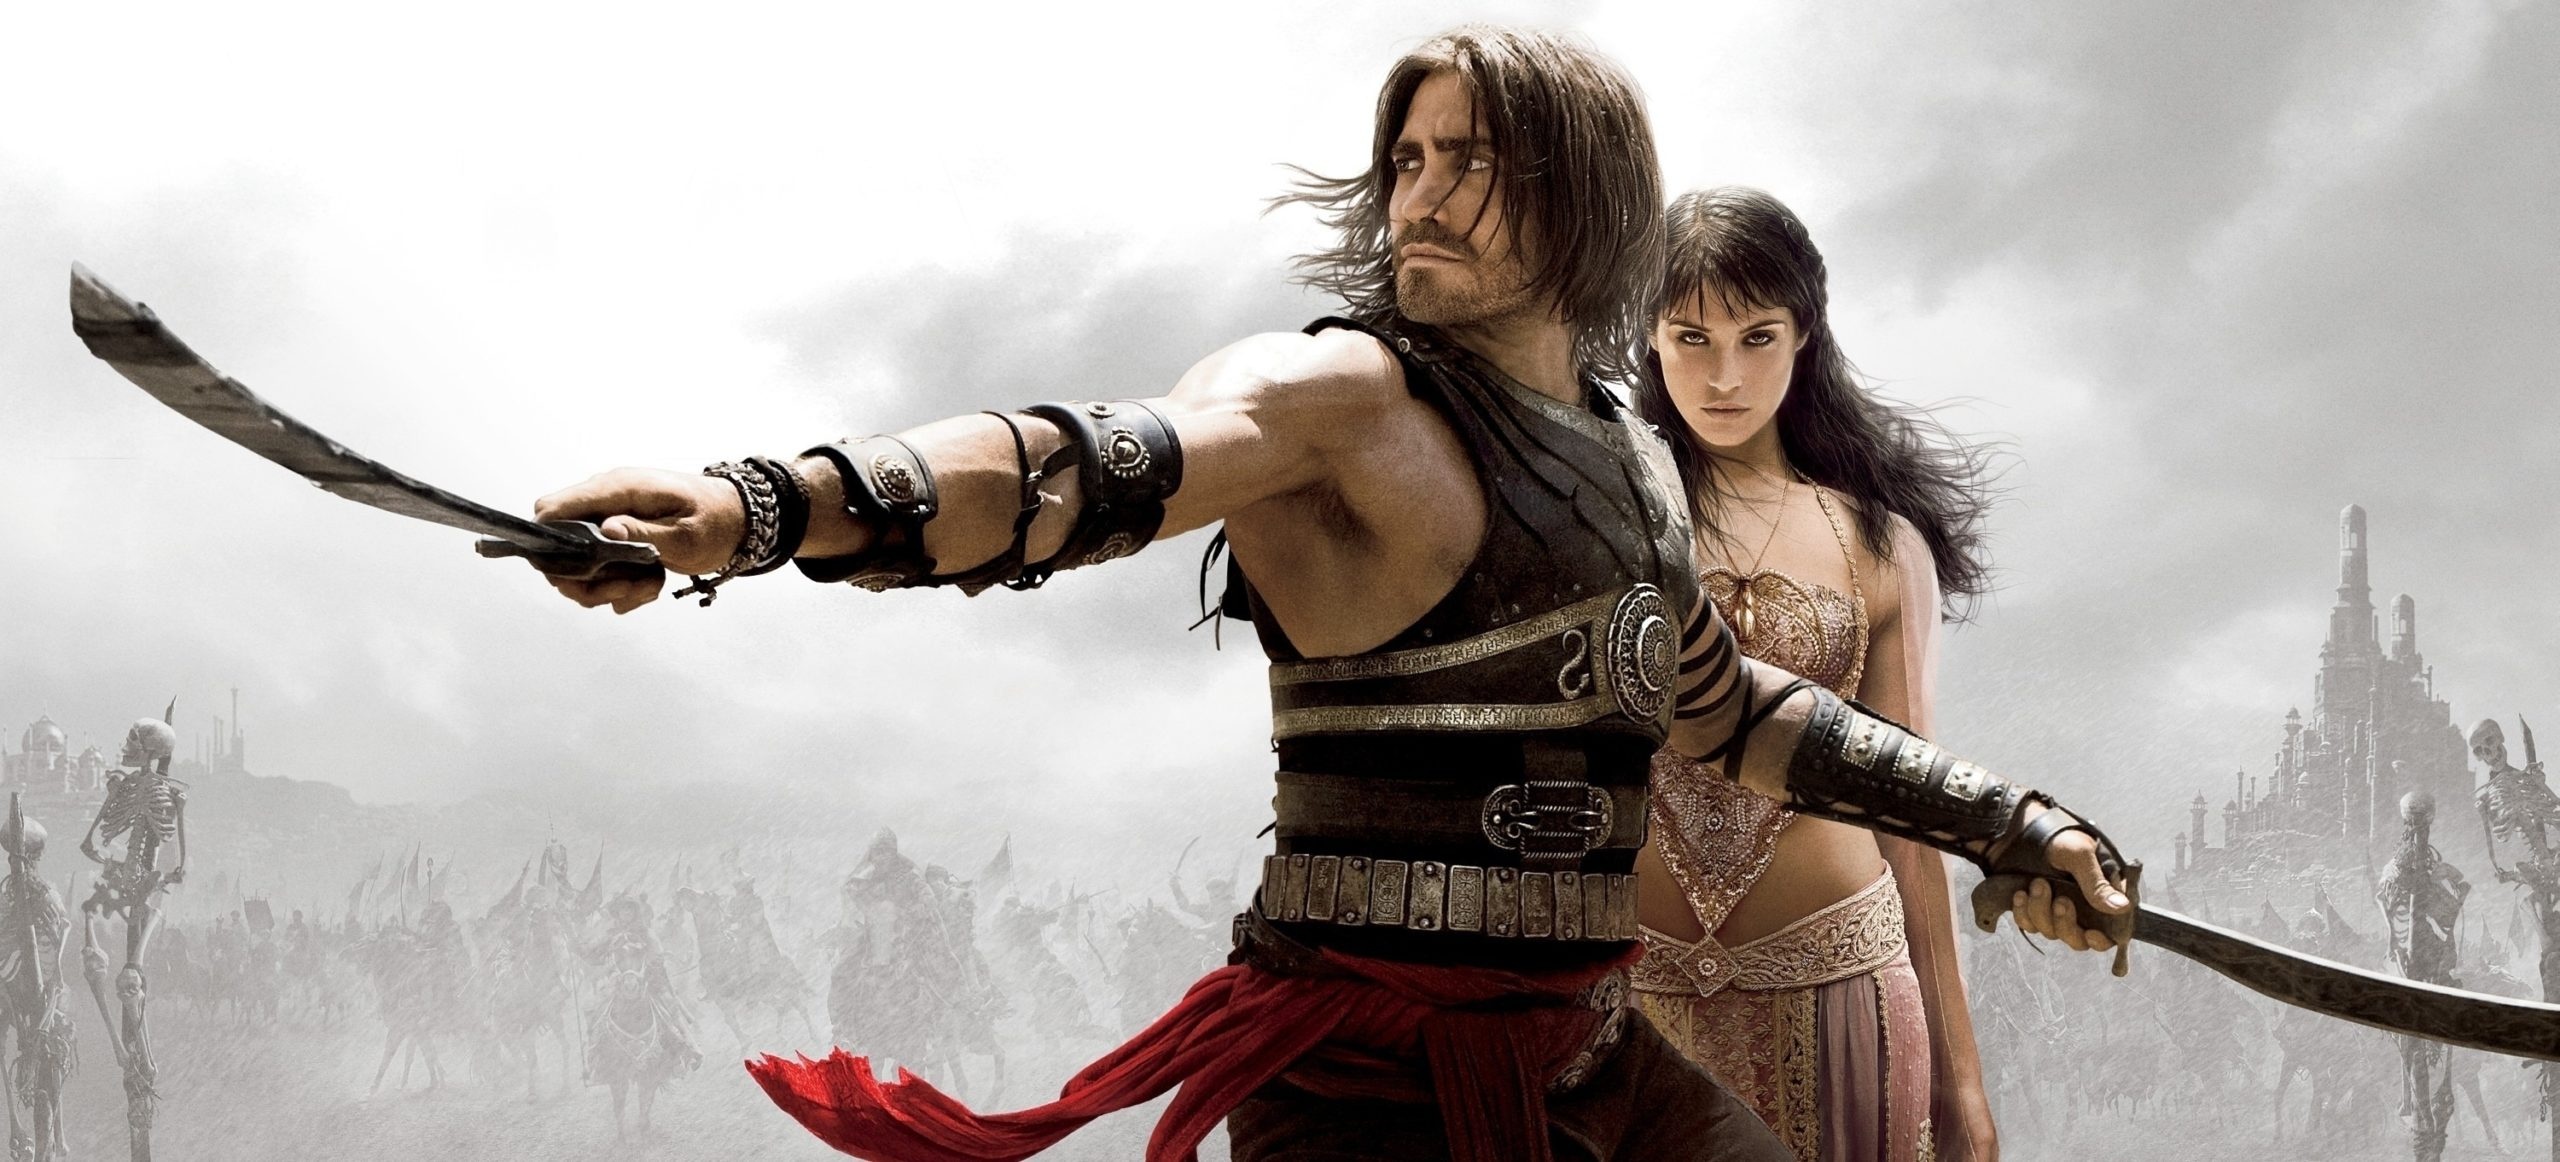 Prince of Persia (Movie): Prince of Persia: Sands of Time, 2010. 2560x1170 Dual Screen Background.